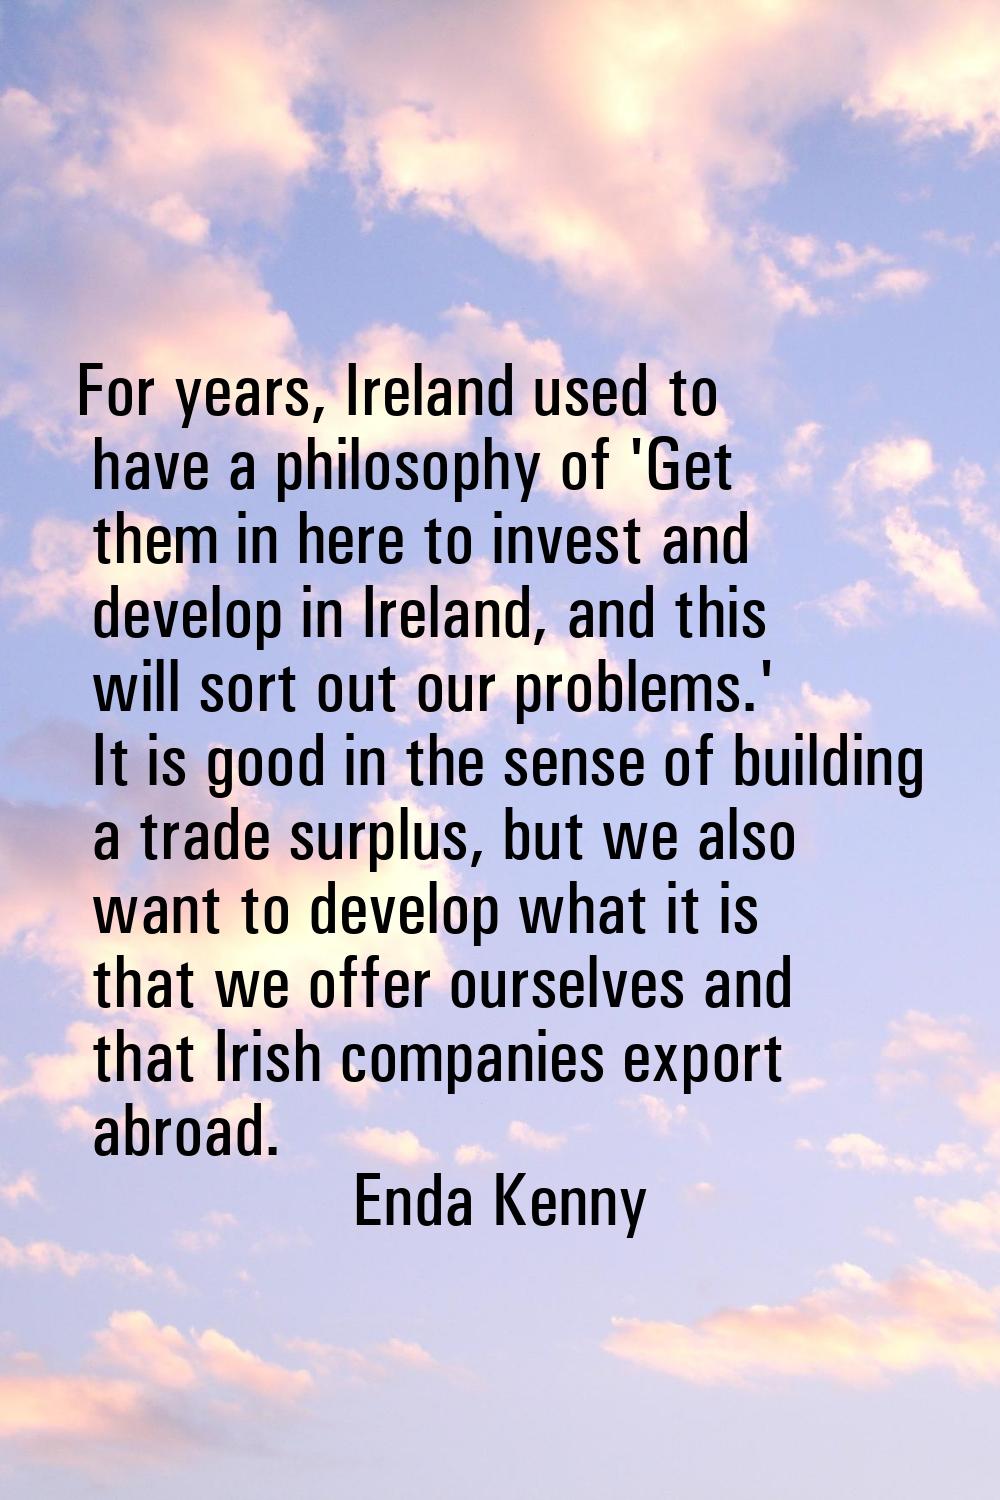 For years, Ireland used to have a philosophy of 'Get them in here to invest and develop in Ireland,